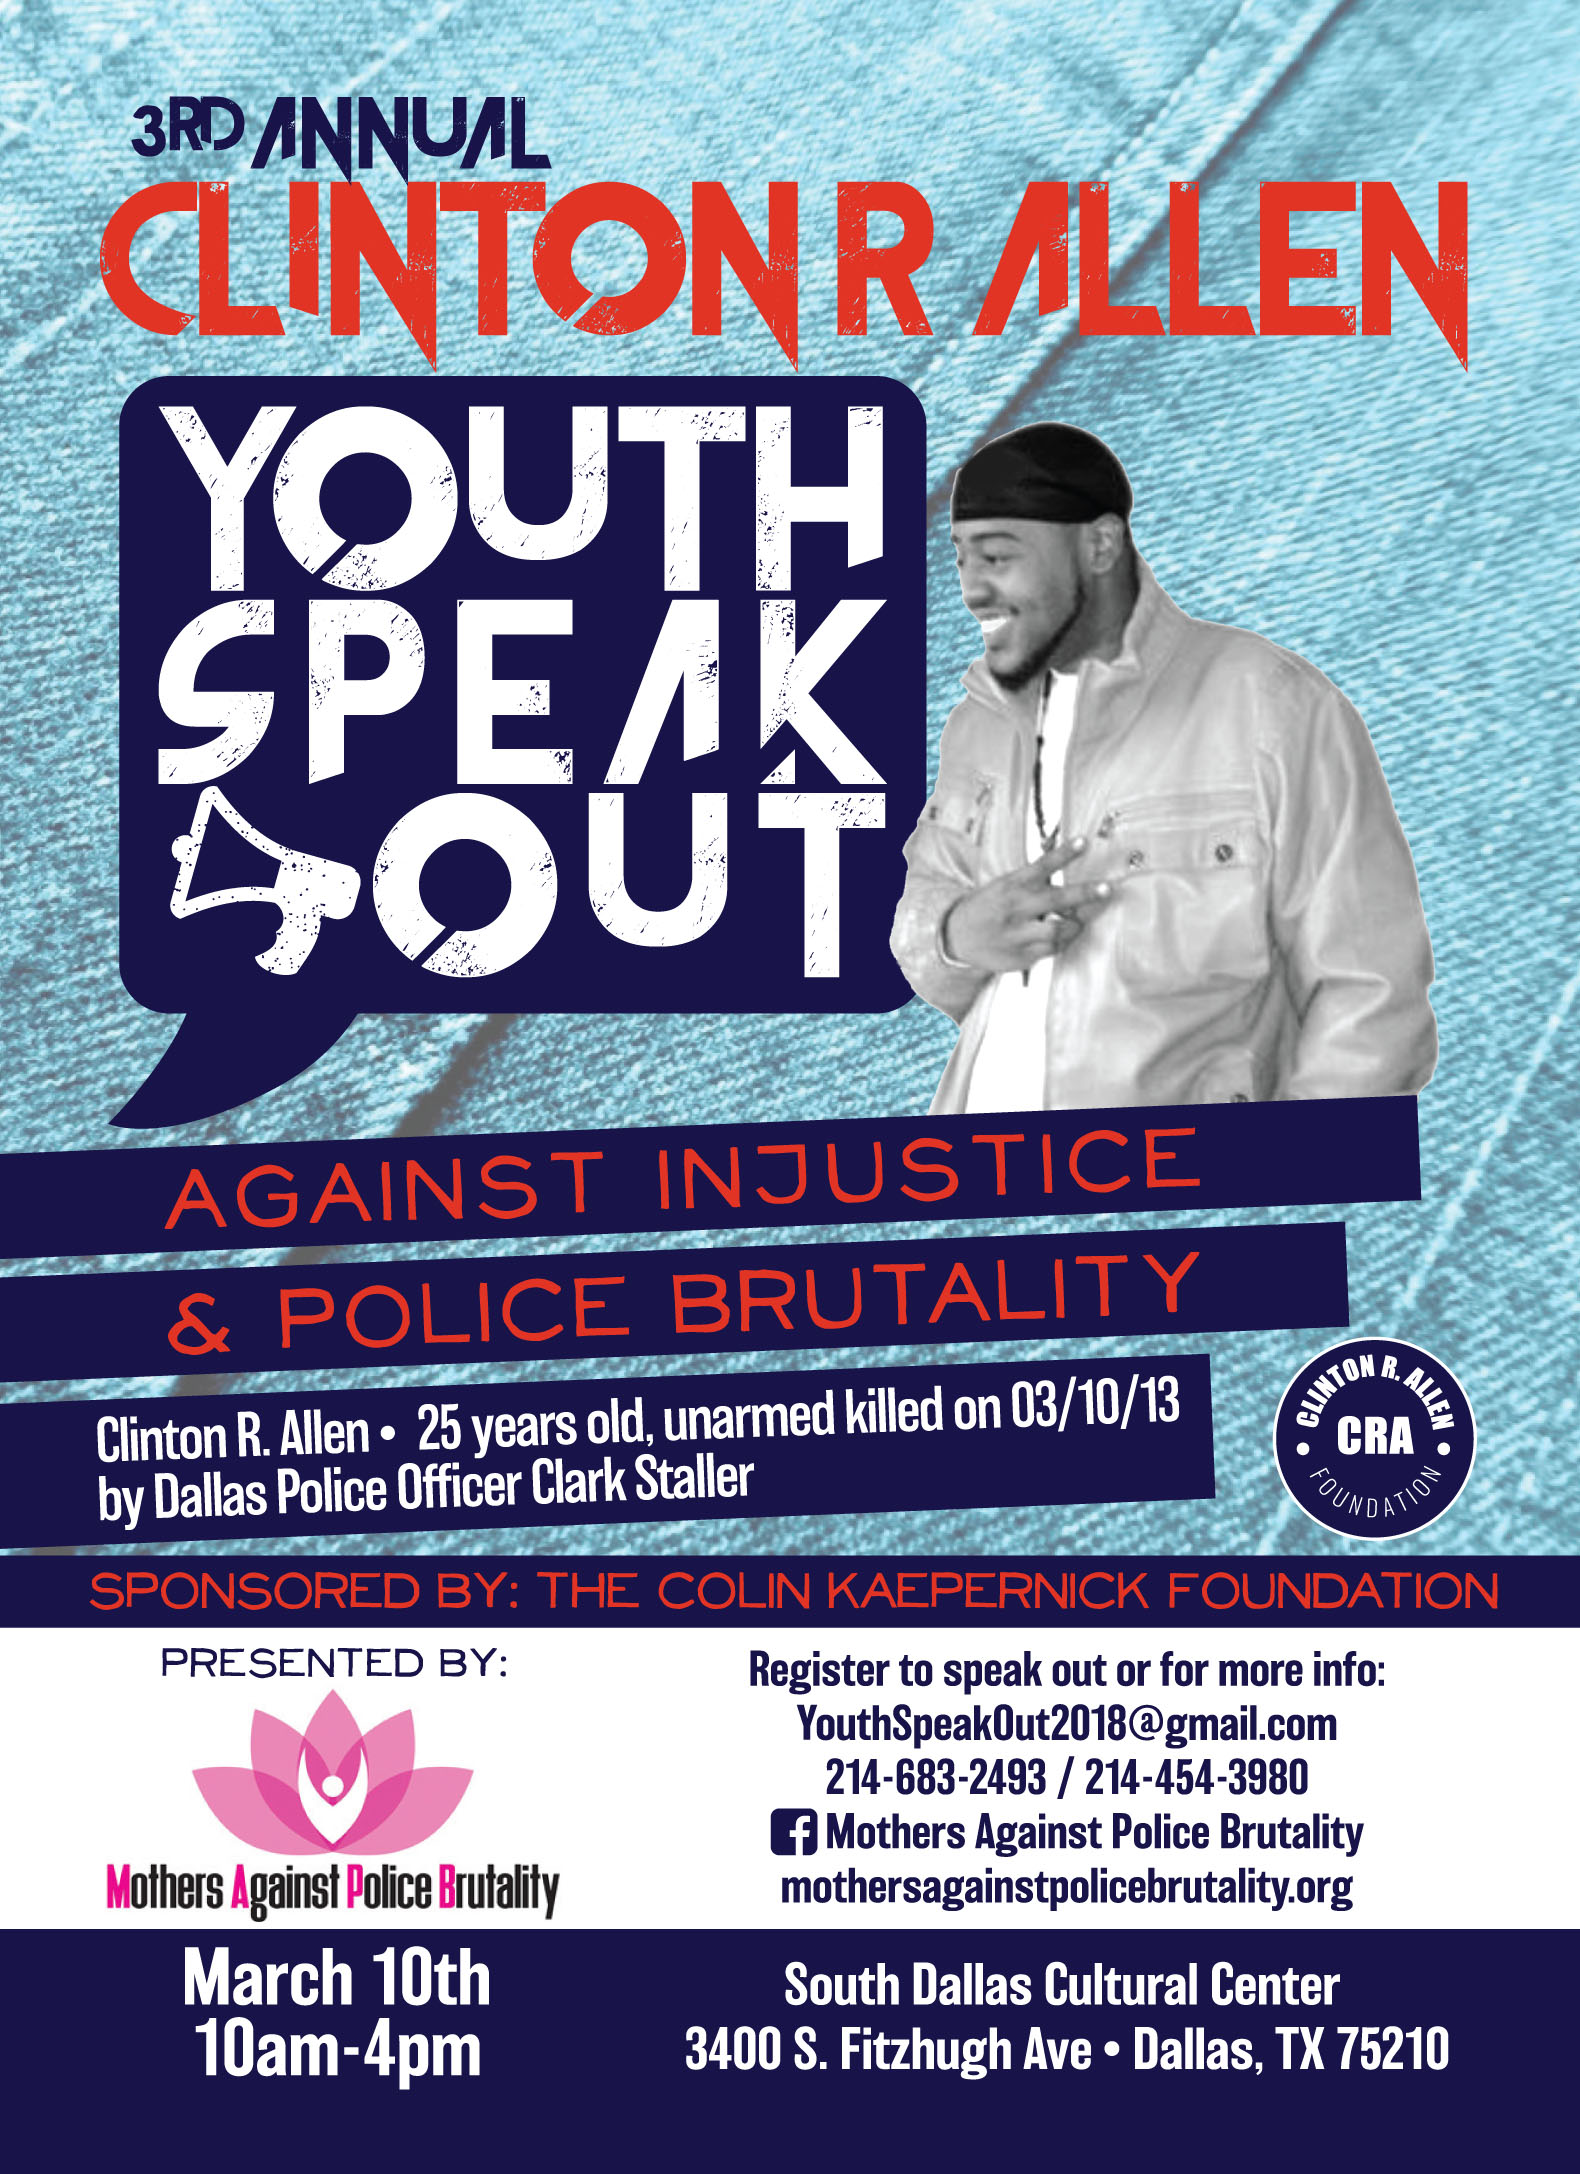 3rd Annual Clinton R. Allen Youth Speakout Against Injustice & Police Brutality